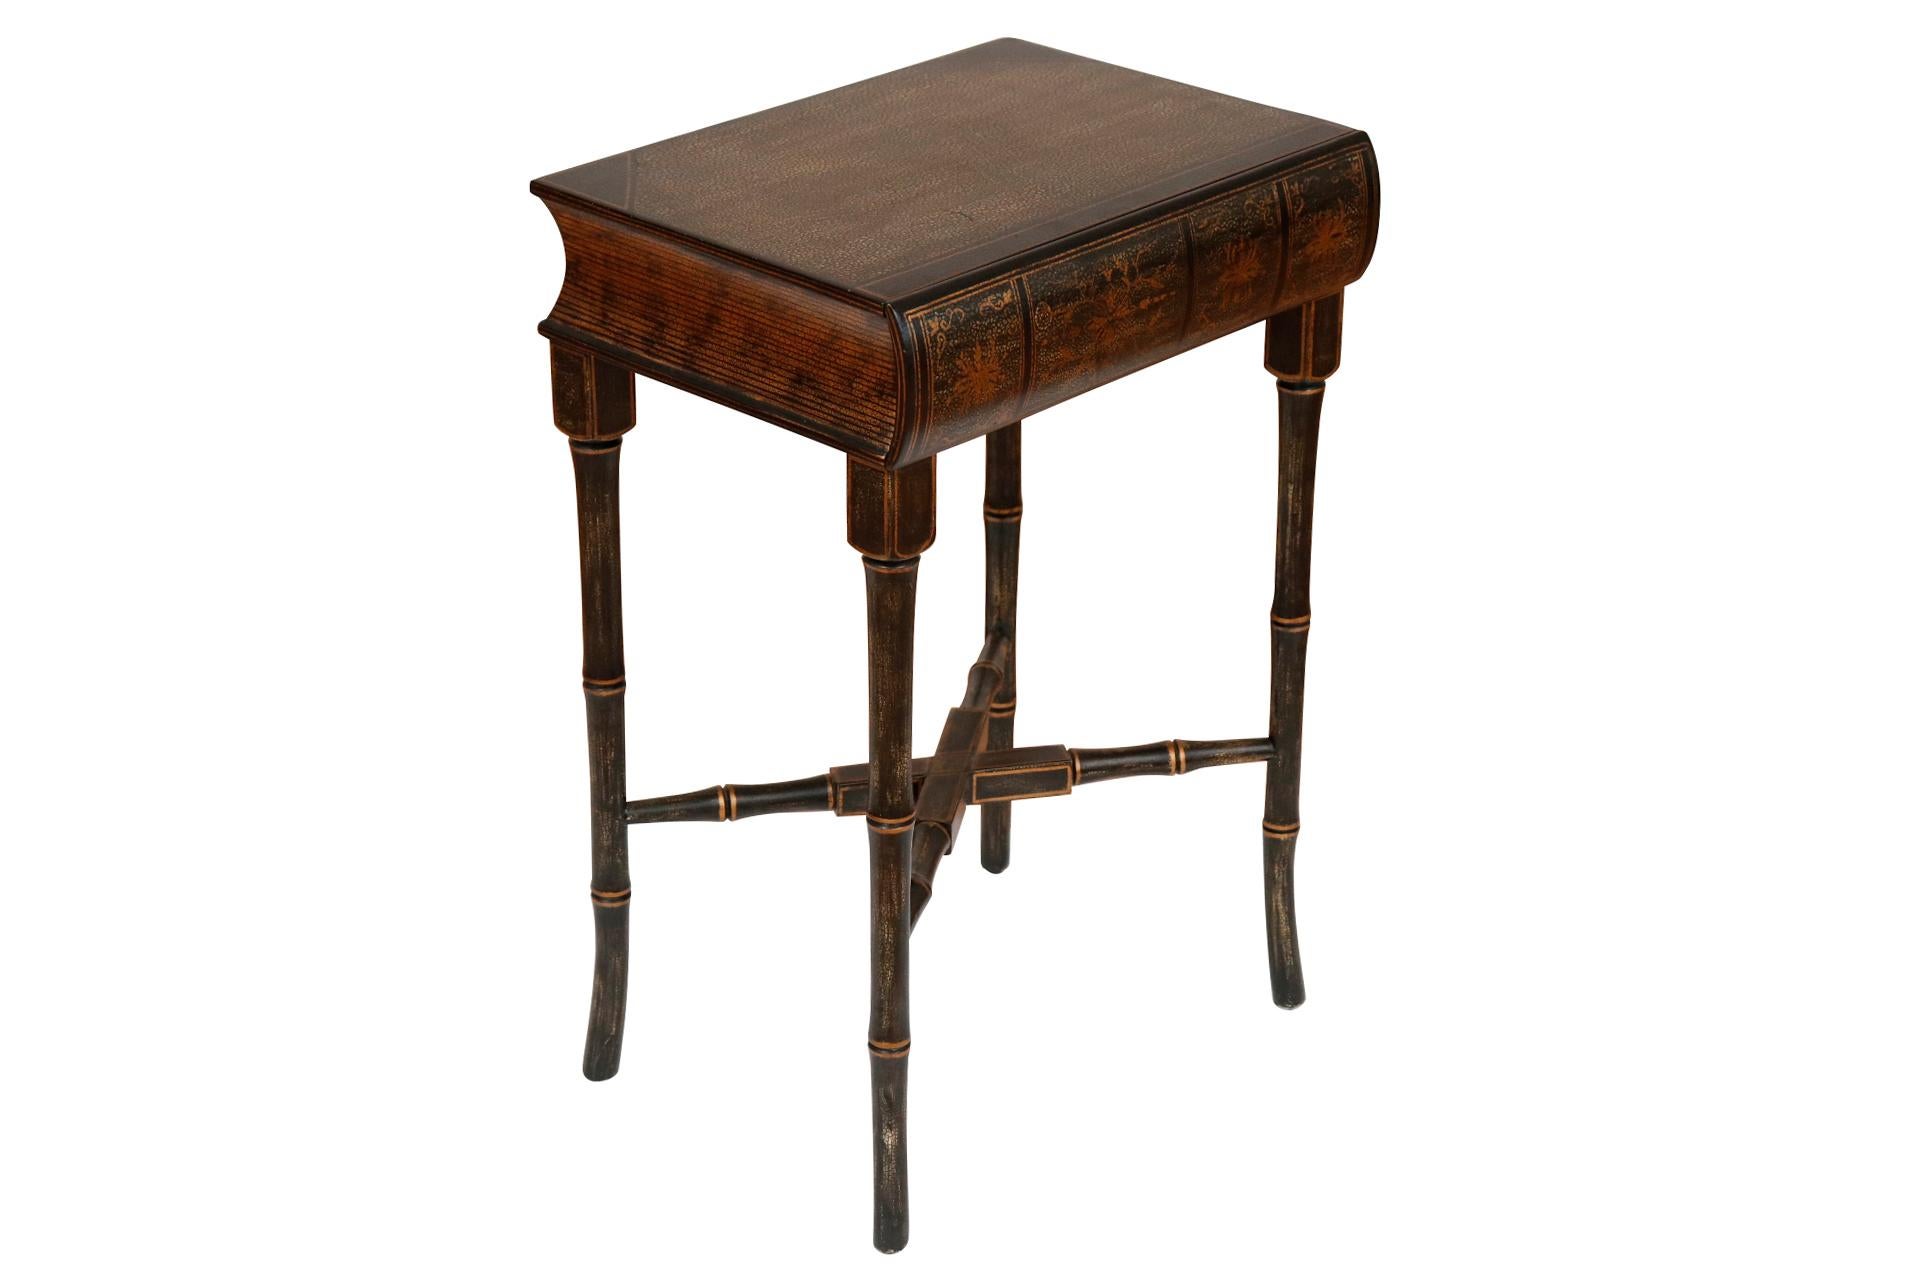 A Chinoiserie side table with a faux book top made by Harden Furniture of NY. Faux bamboo saber legs connected with an x-stretcher support a table top carved to look like a thick book, the 'spine' of which opens to reveal a drawer. Lacquered black